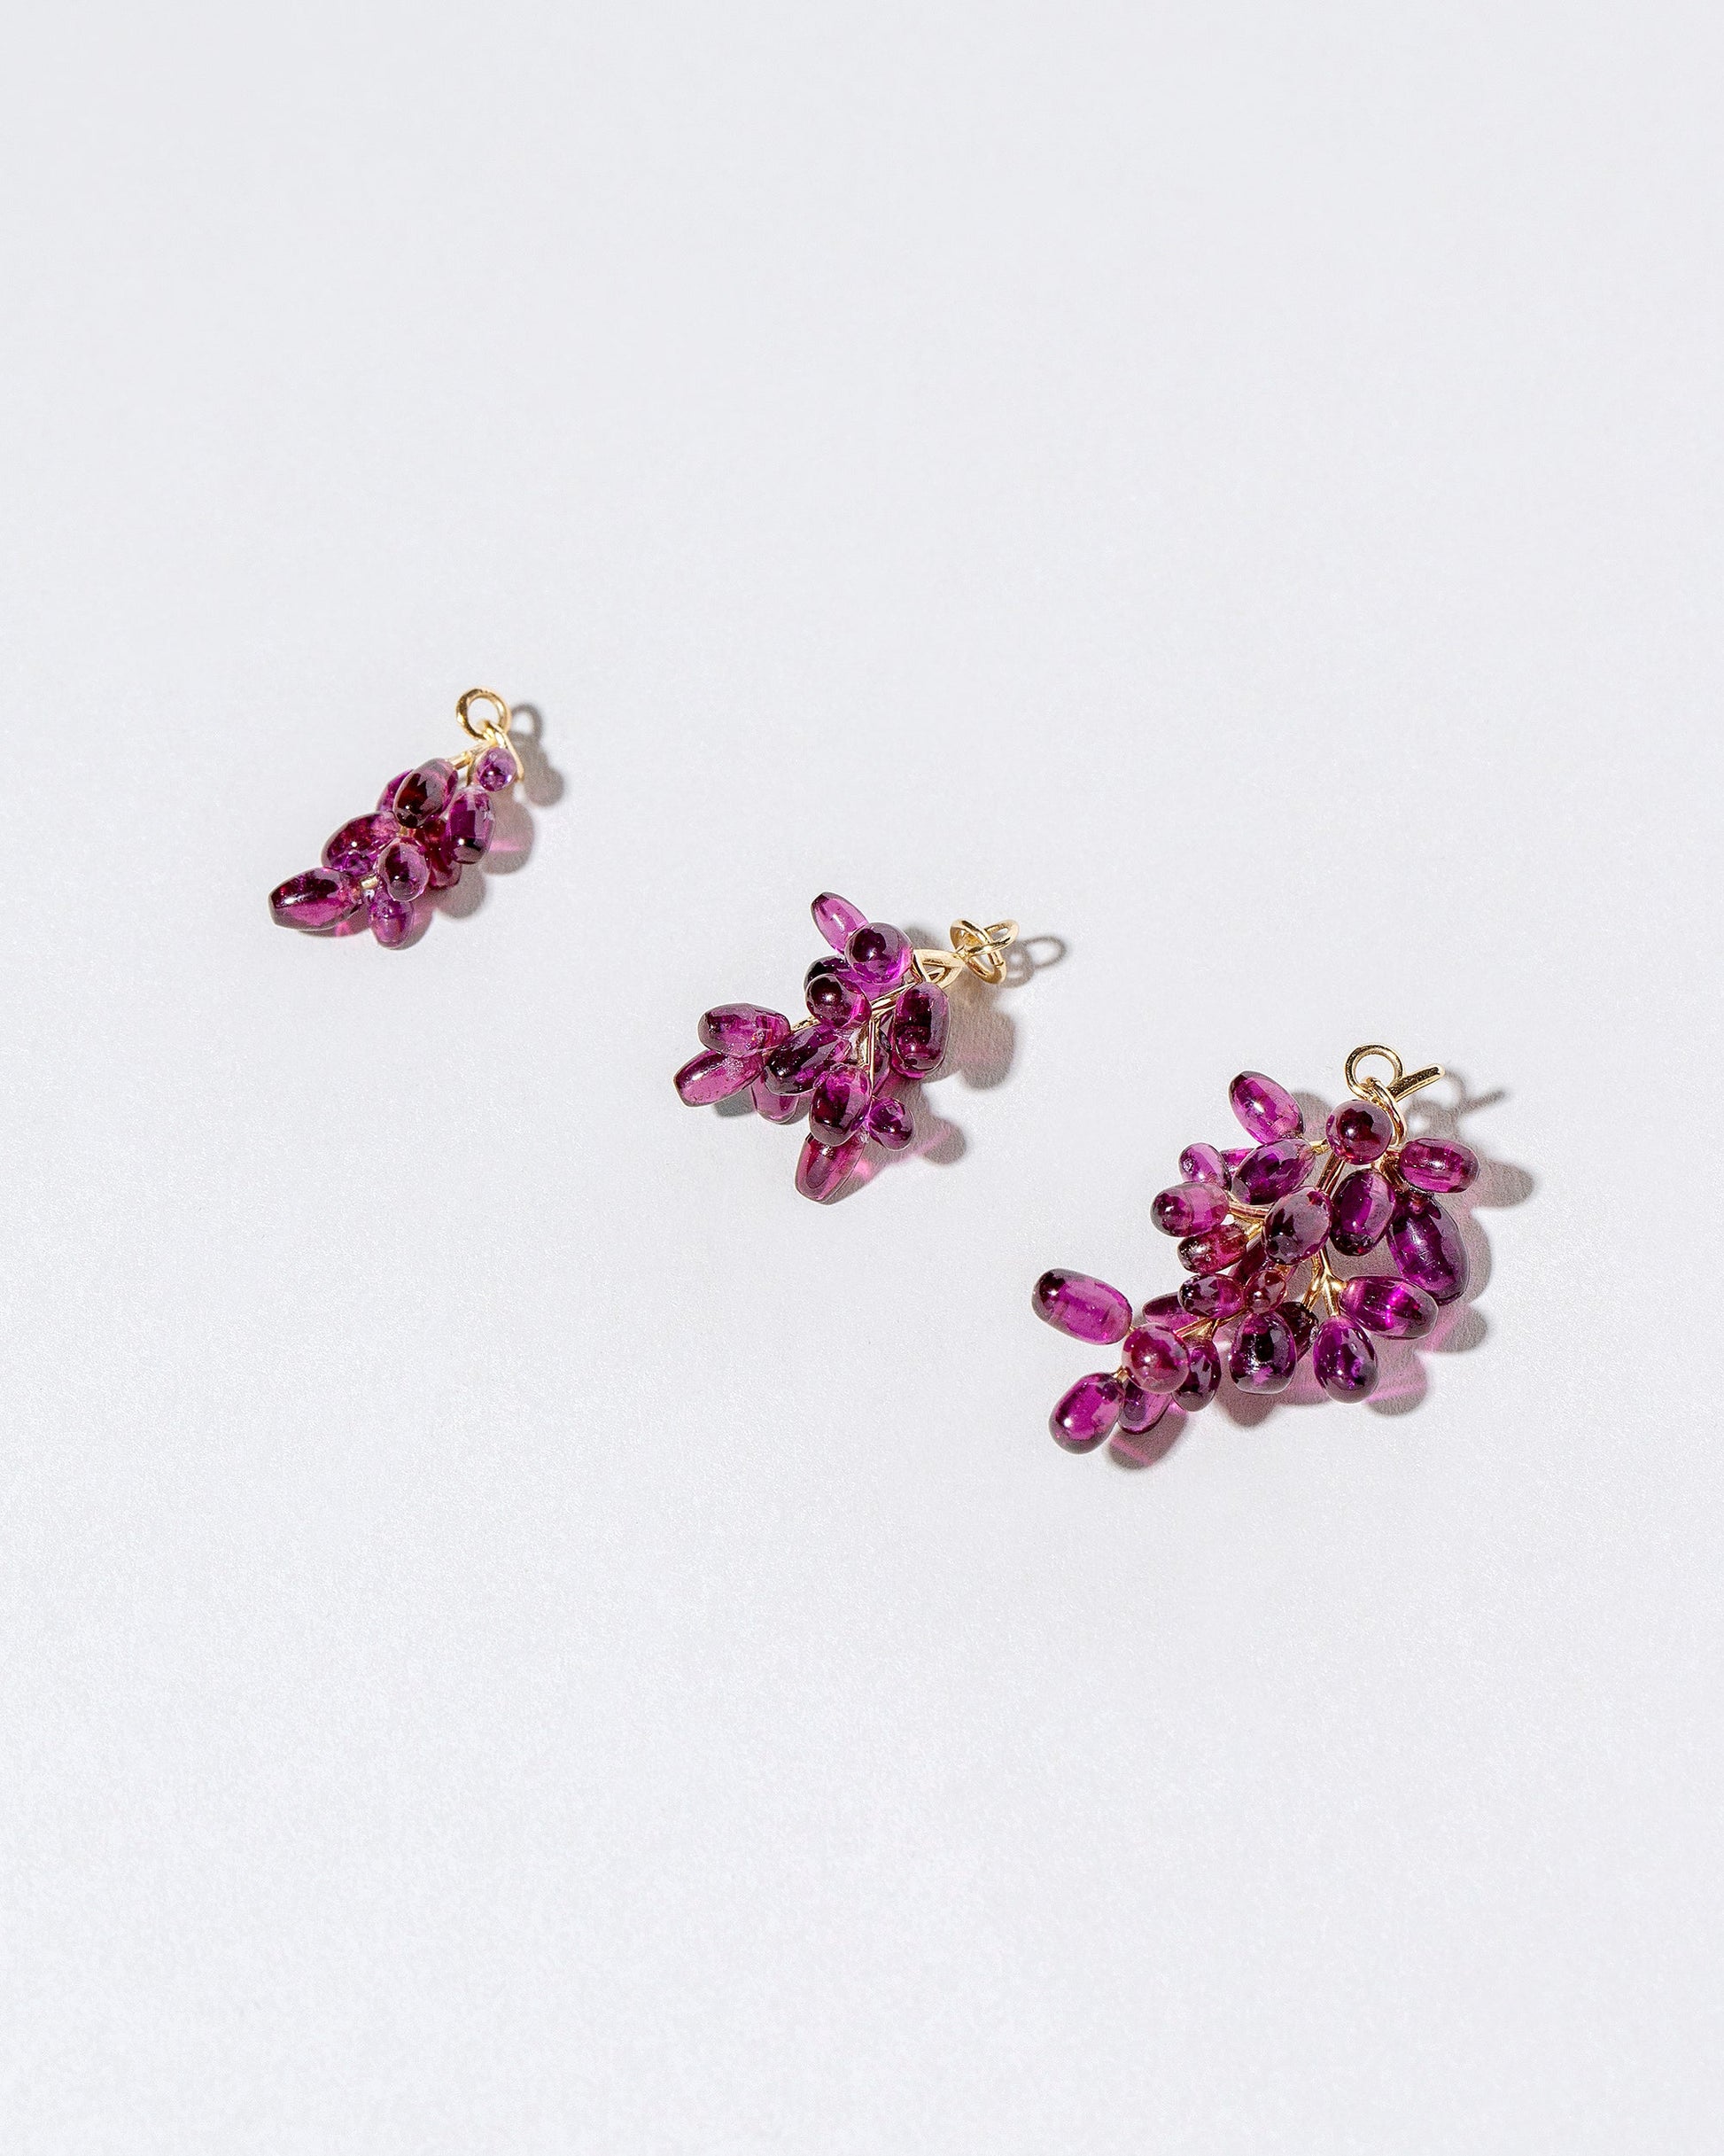  Table Grapes Charm on light color background.